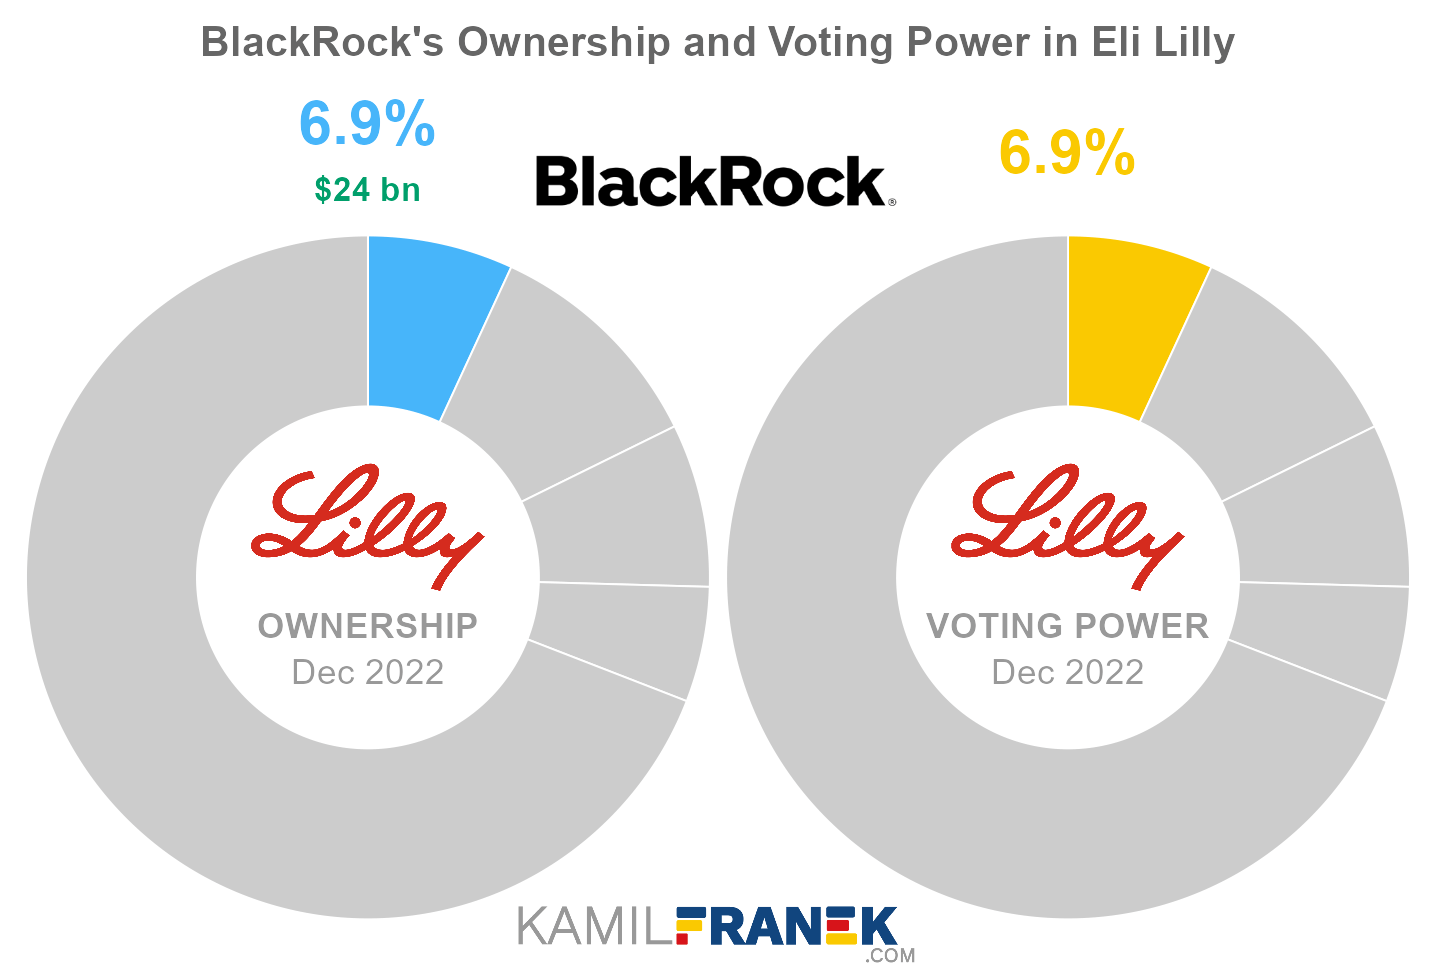 BlackRock's share ownership and voting power in Eli Lilly (chart)